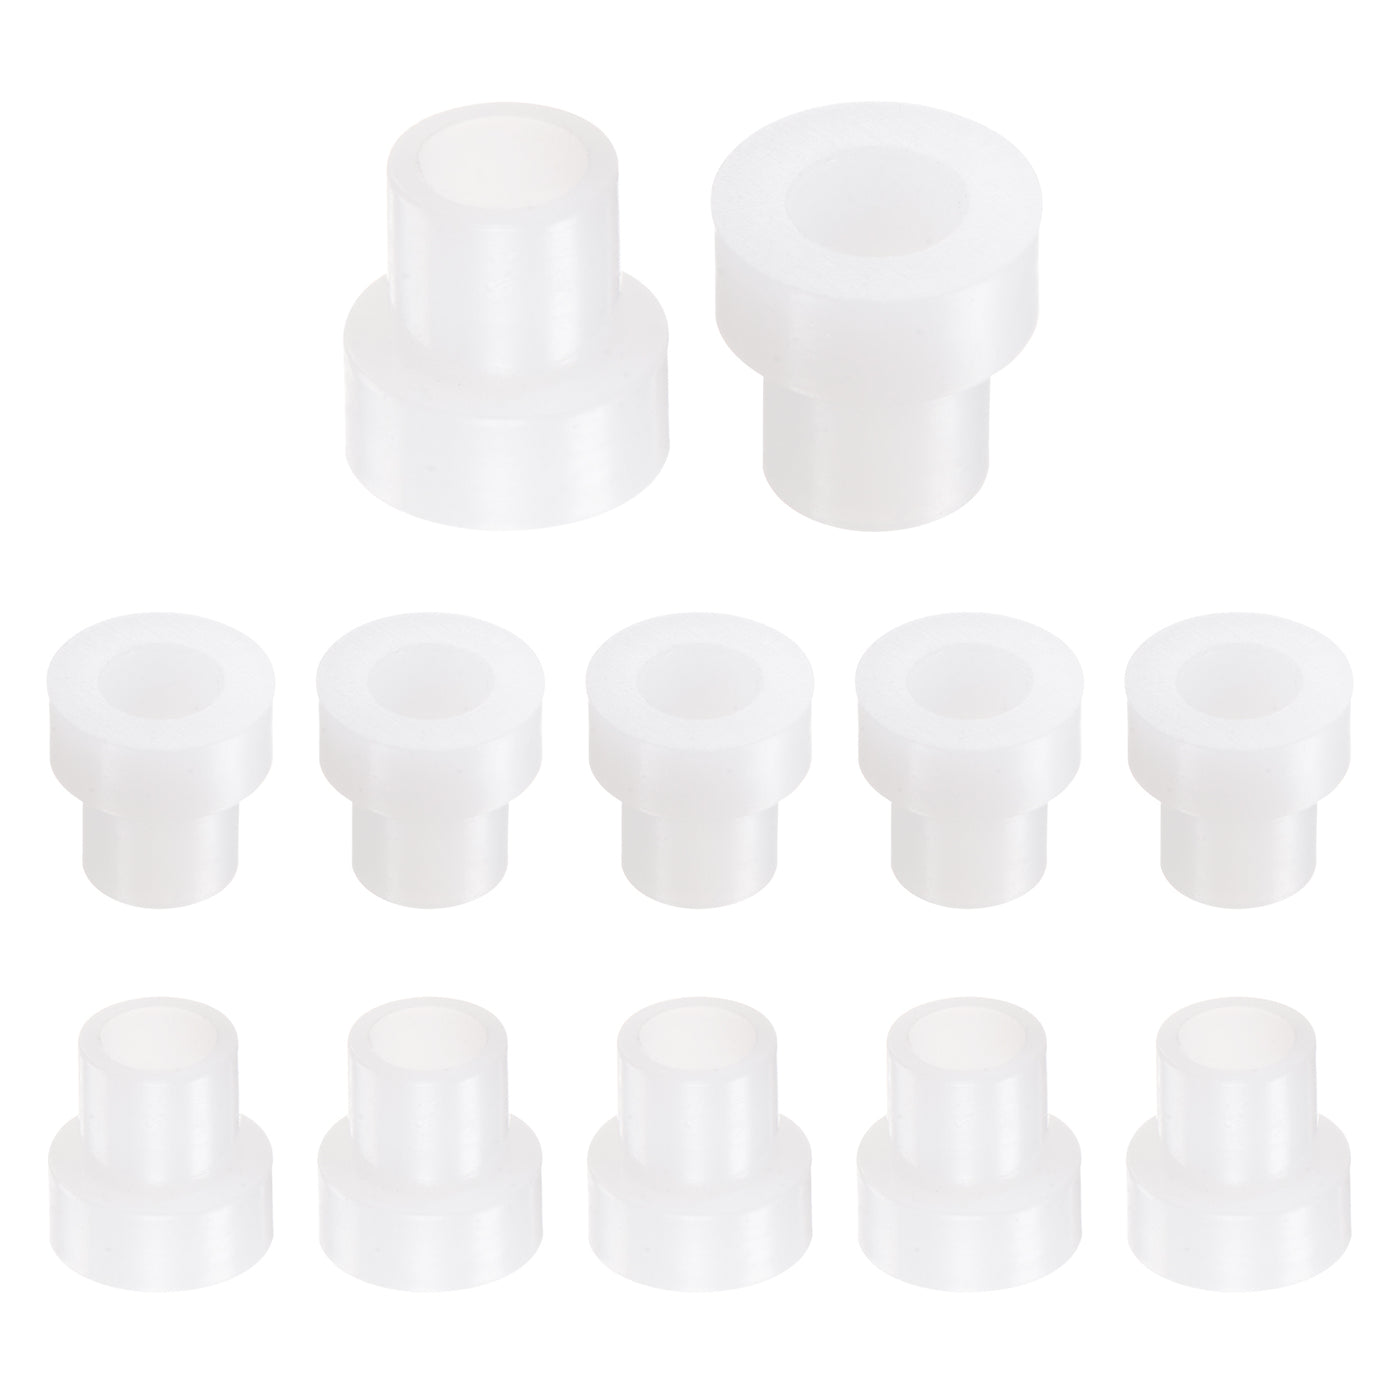 uxcell Uxcell 12pcs Flanged Sleeve Bearings 5mm ID 7mm OD 10mm Length Nylon Bushings, White